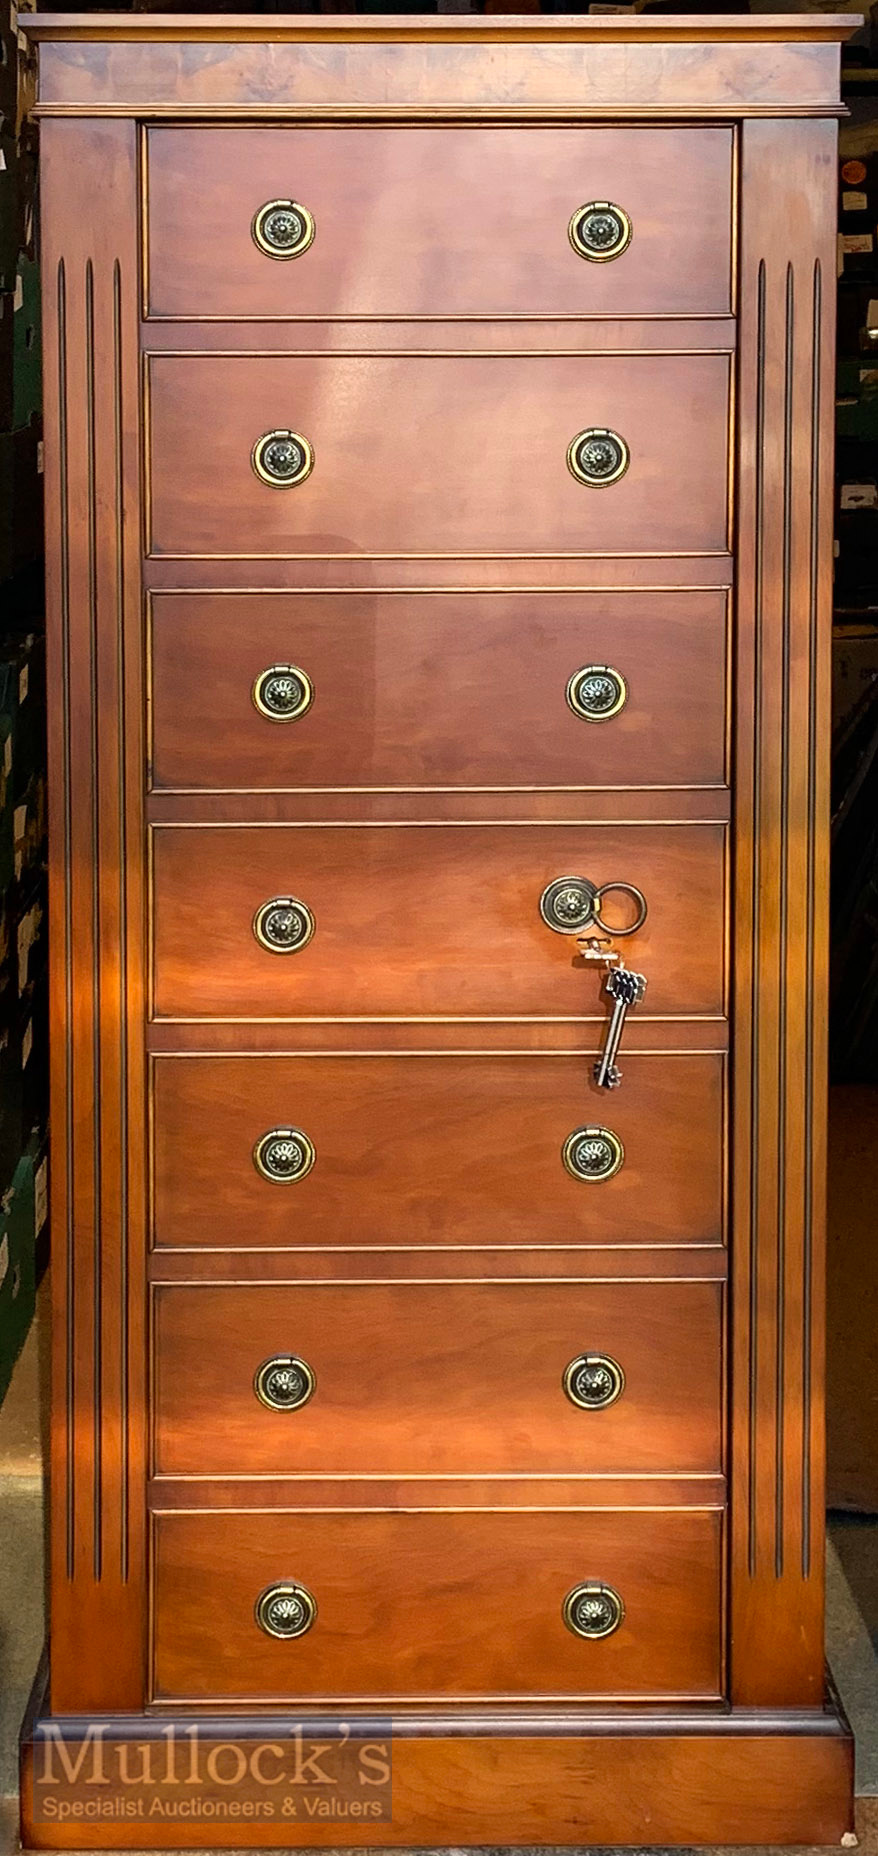 Fine and Stunning “The Wellington” Model 301 Gun Cabinet in Yew Wood Finish made by 21st Century